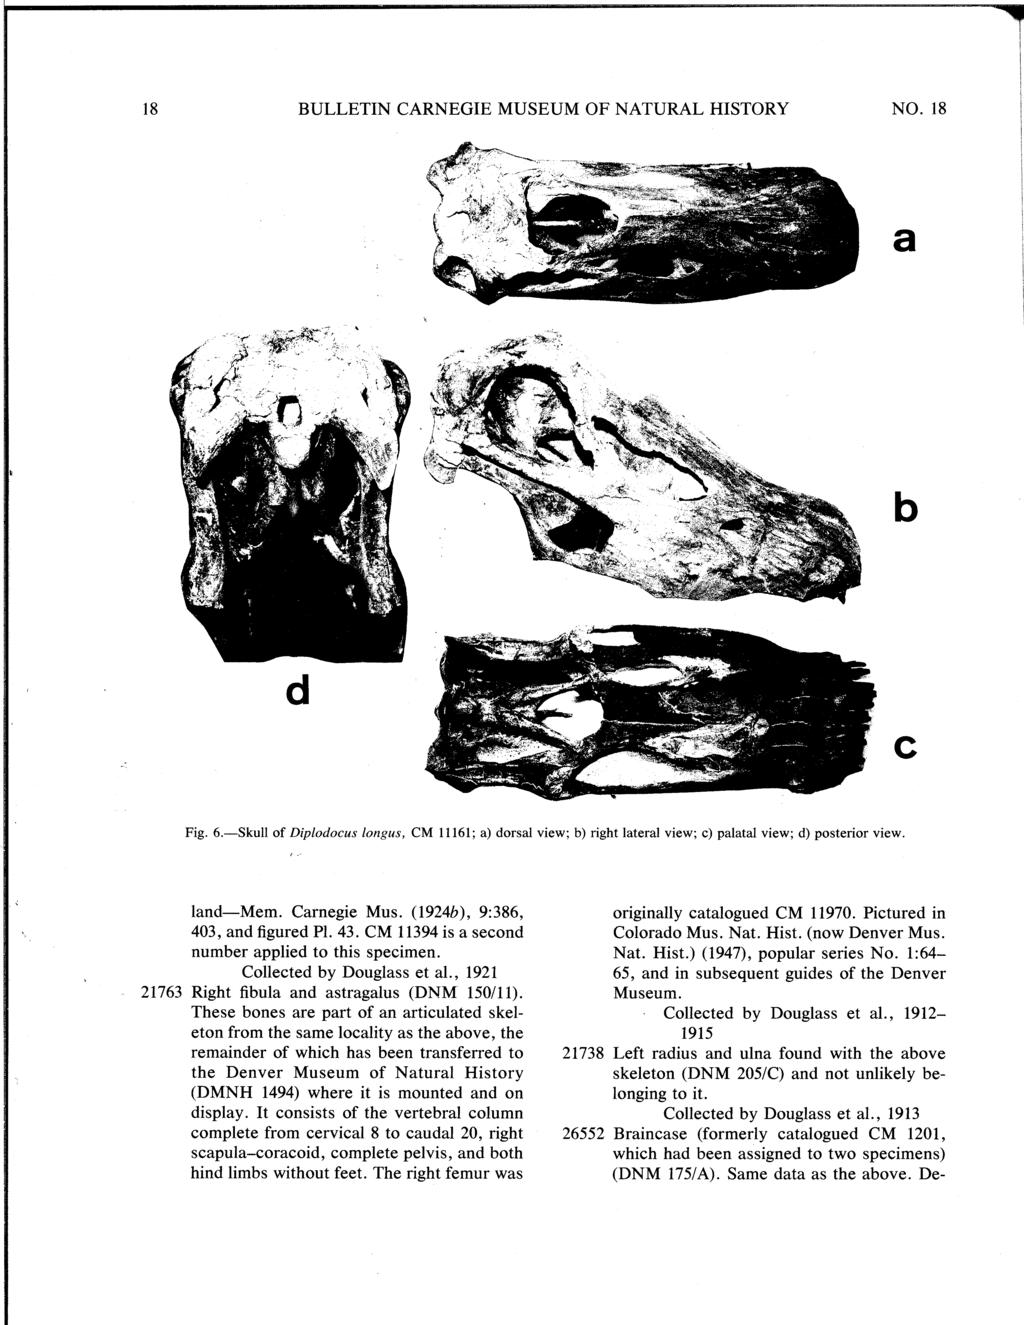 7 18 NO. 18 Fig. 6. Skull of Diplodocus longus, CM 11161; a) dorsal view; b) right lateral view; c) palatal view; d) posterior view. land Mem. Carnegie Mus. (19246), 9:386, 403, and figured PI. 43.